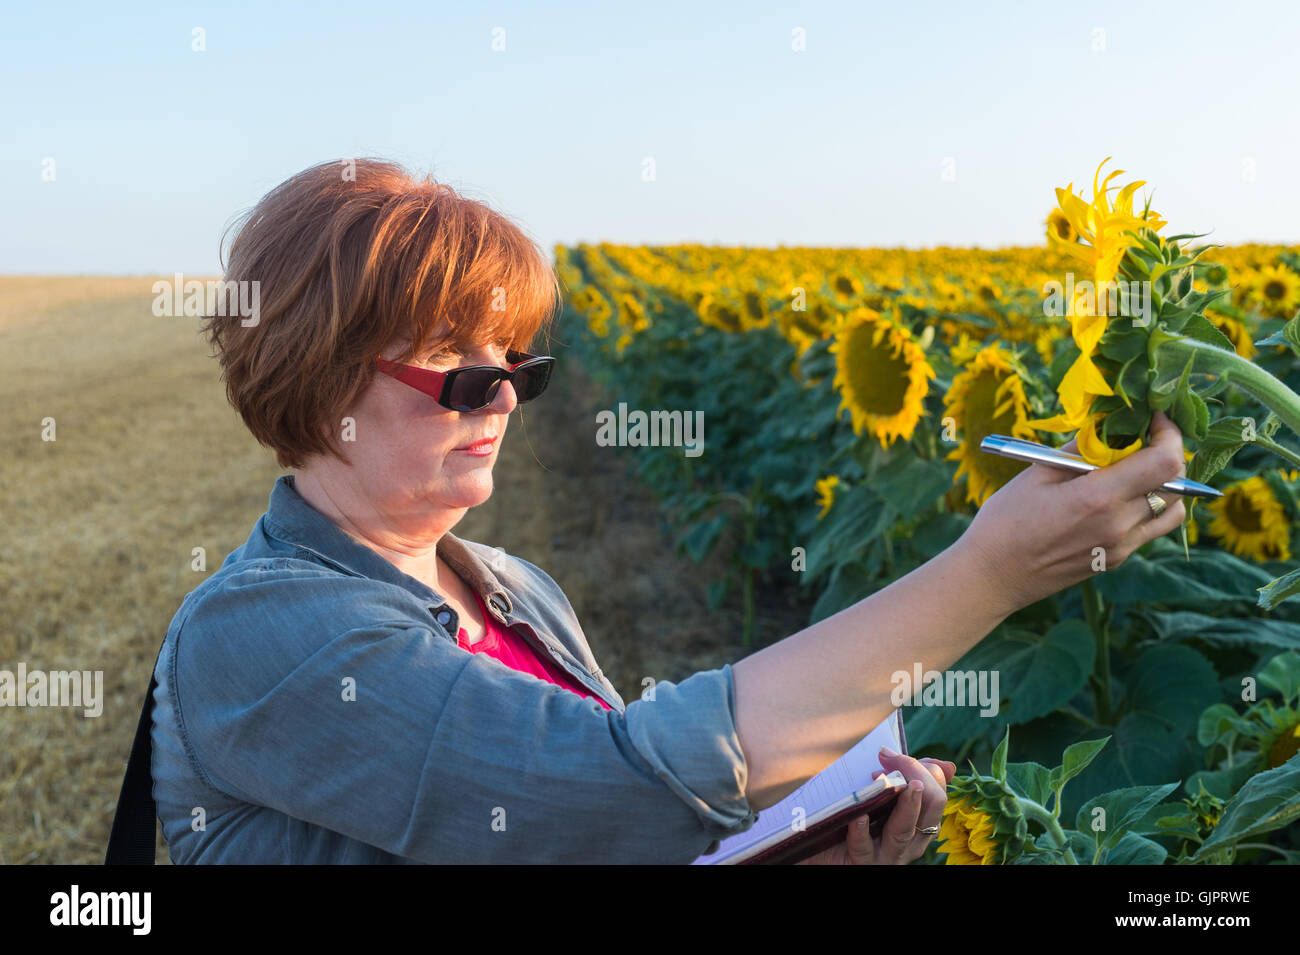 Agricultural expert inspecting quality of sunflower Stock Photo